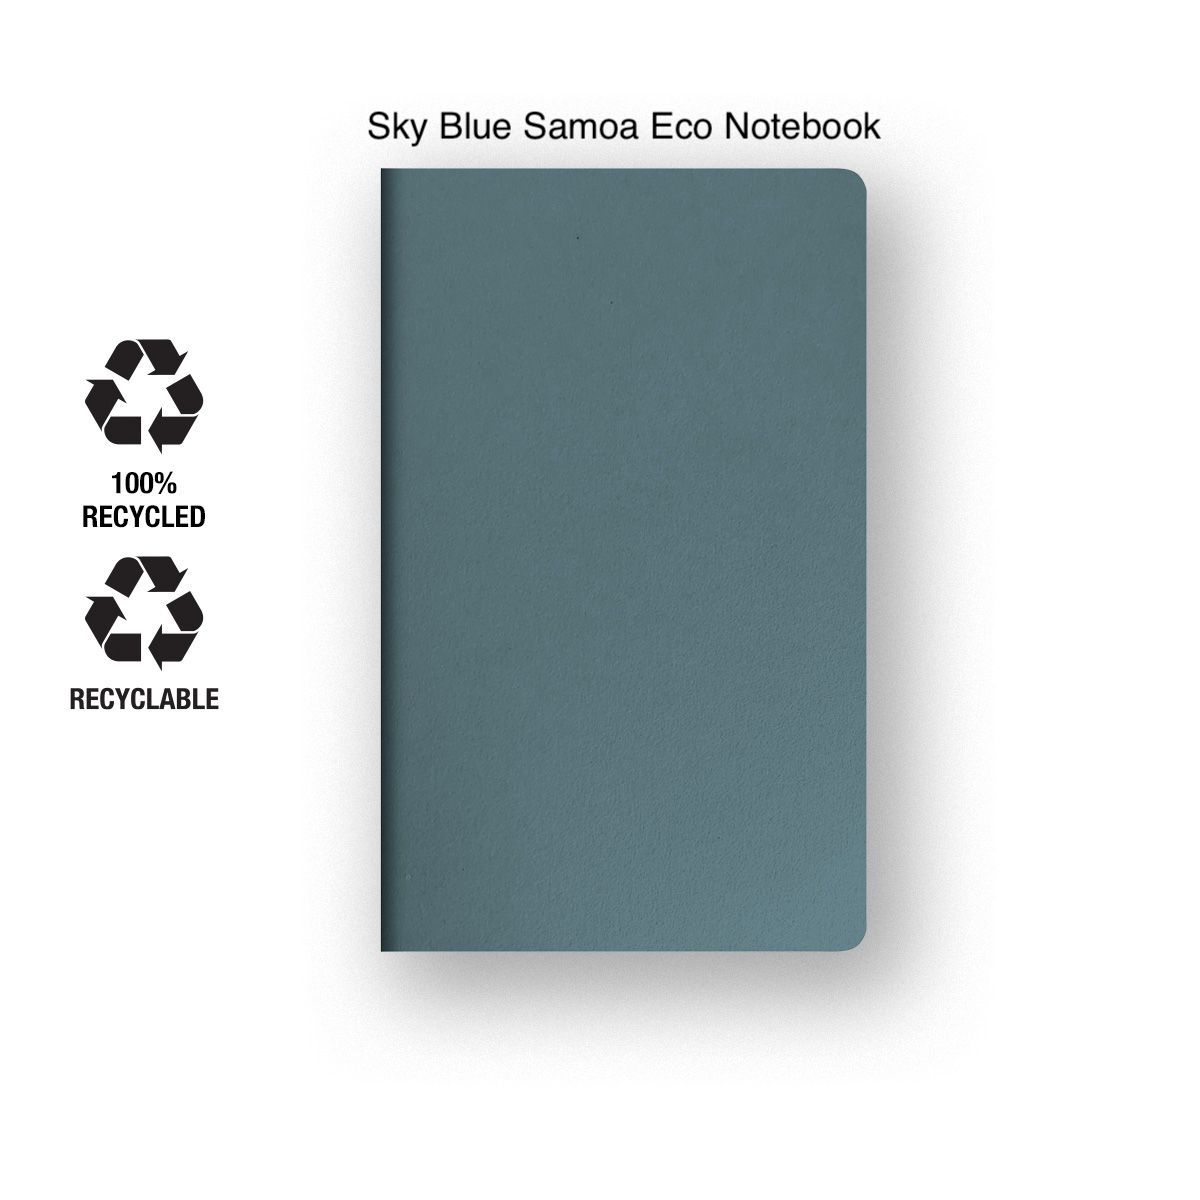 Castelli Samoa medium recycled notebook with ruled paper in sky blue.